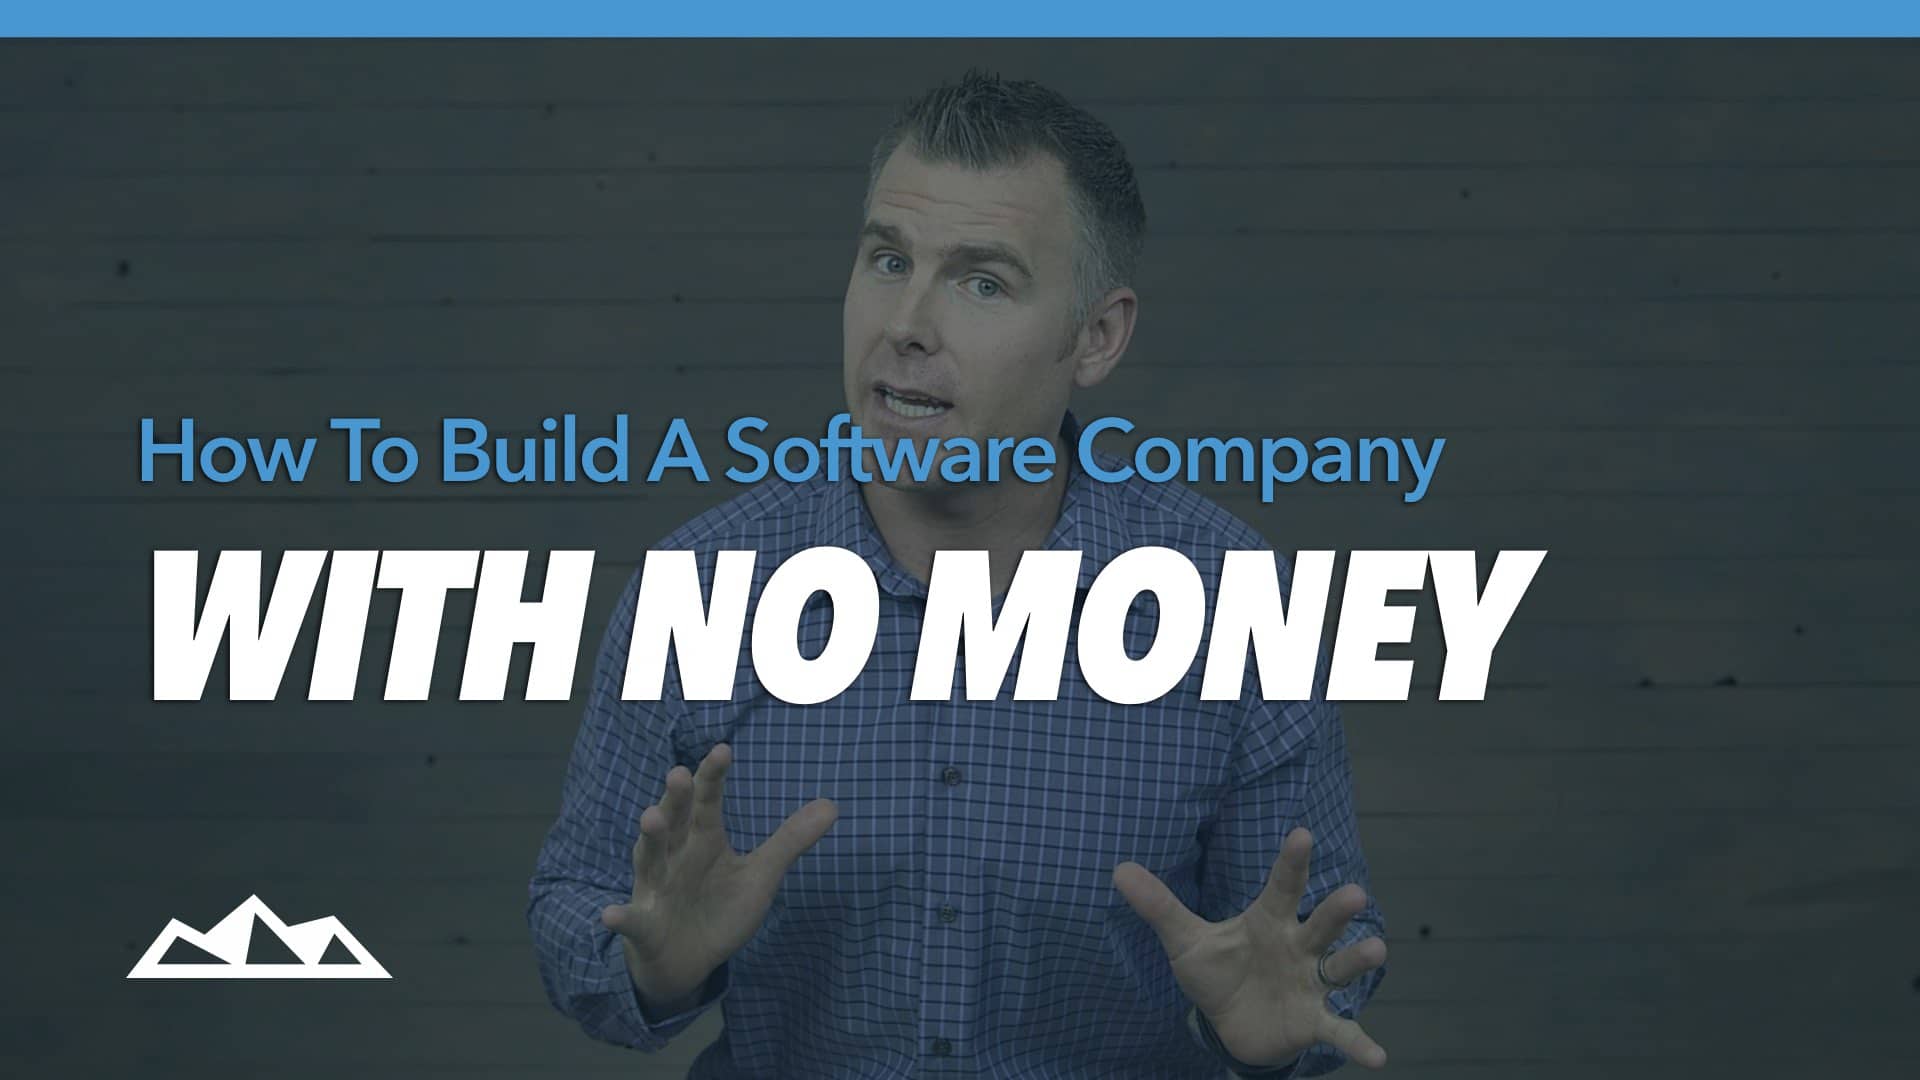 3 Key Principles To Building a Software Company With No Money